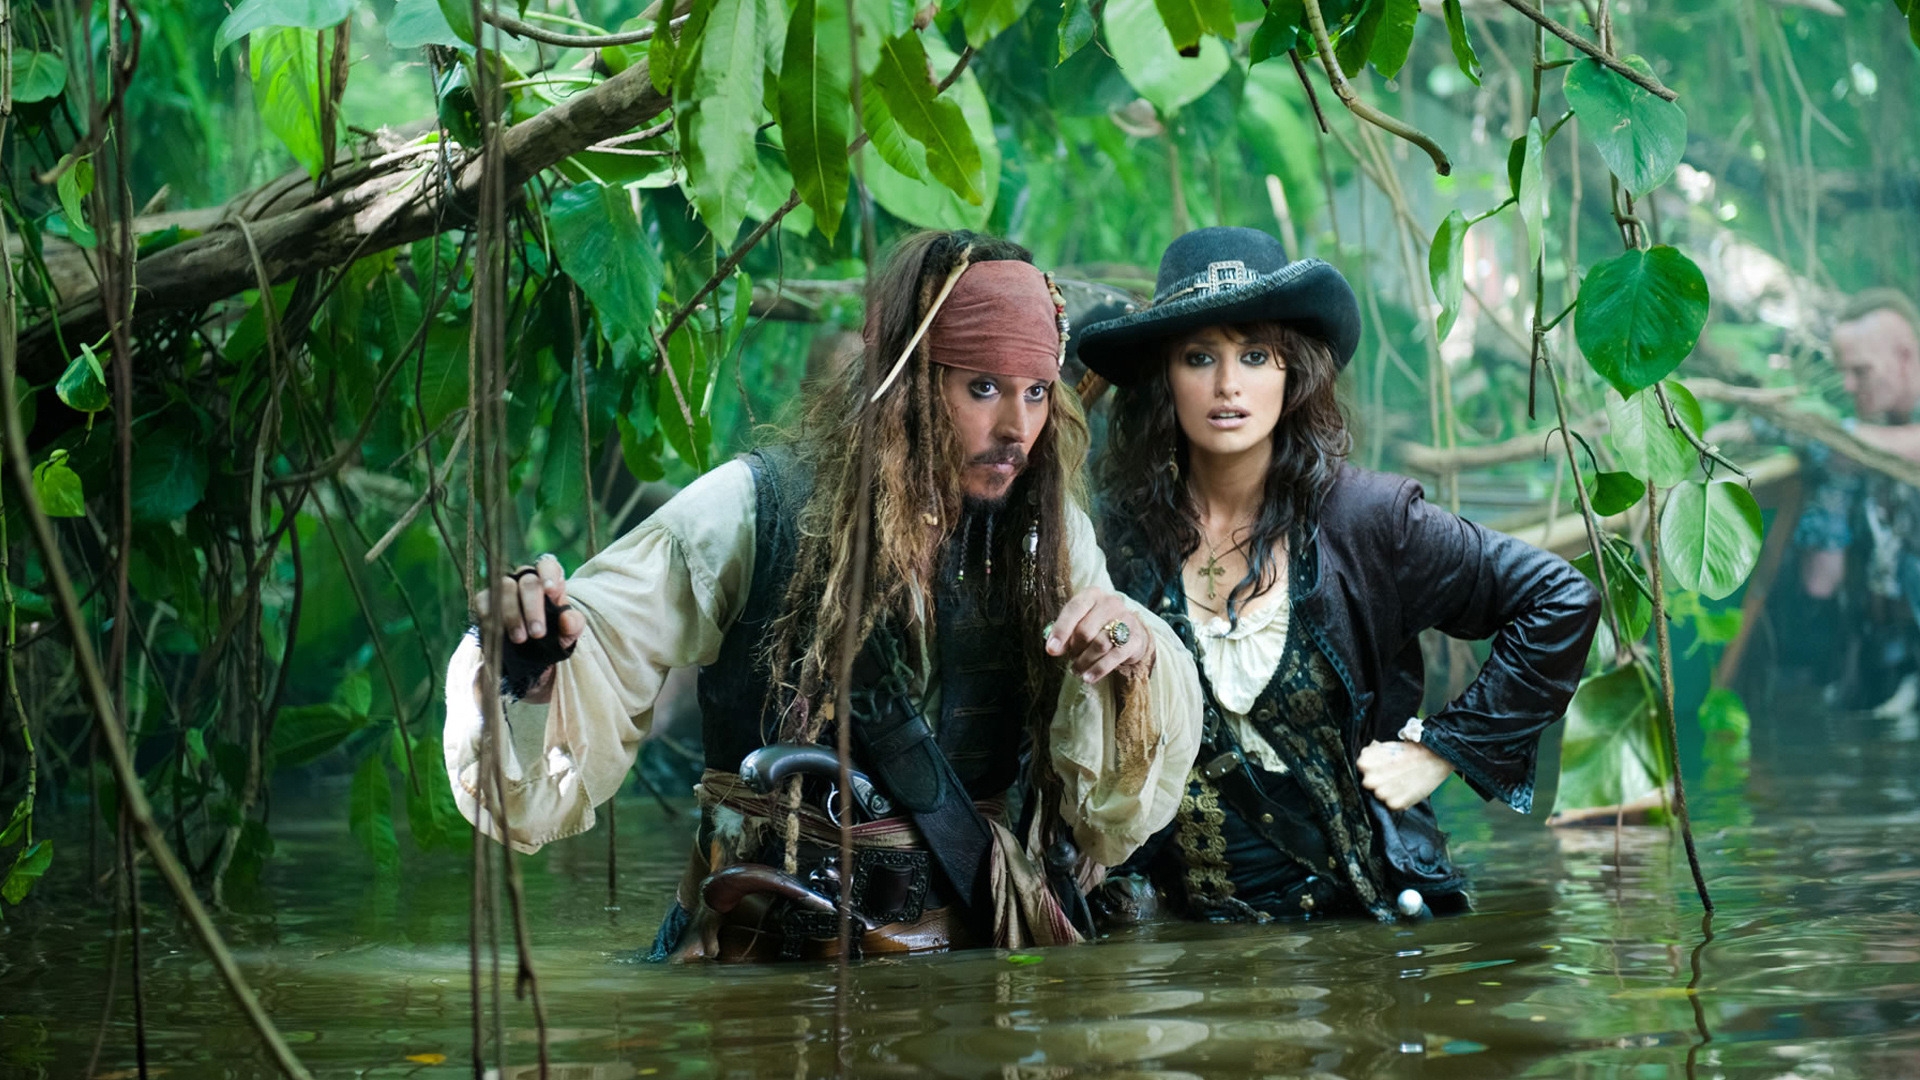 Jack Sparrow and Angelica for 1920 x 1080 HDTV 1080p resolution